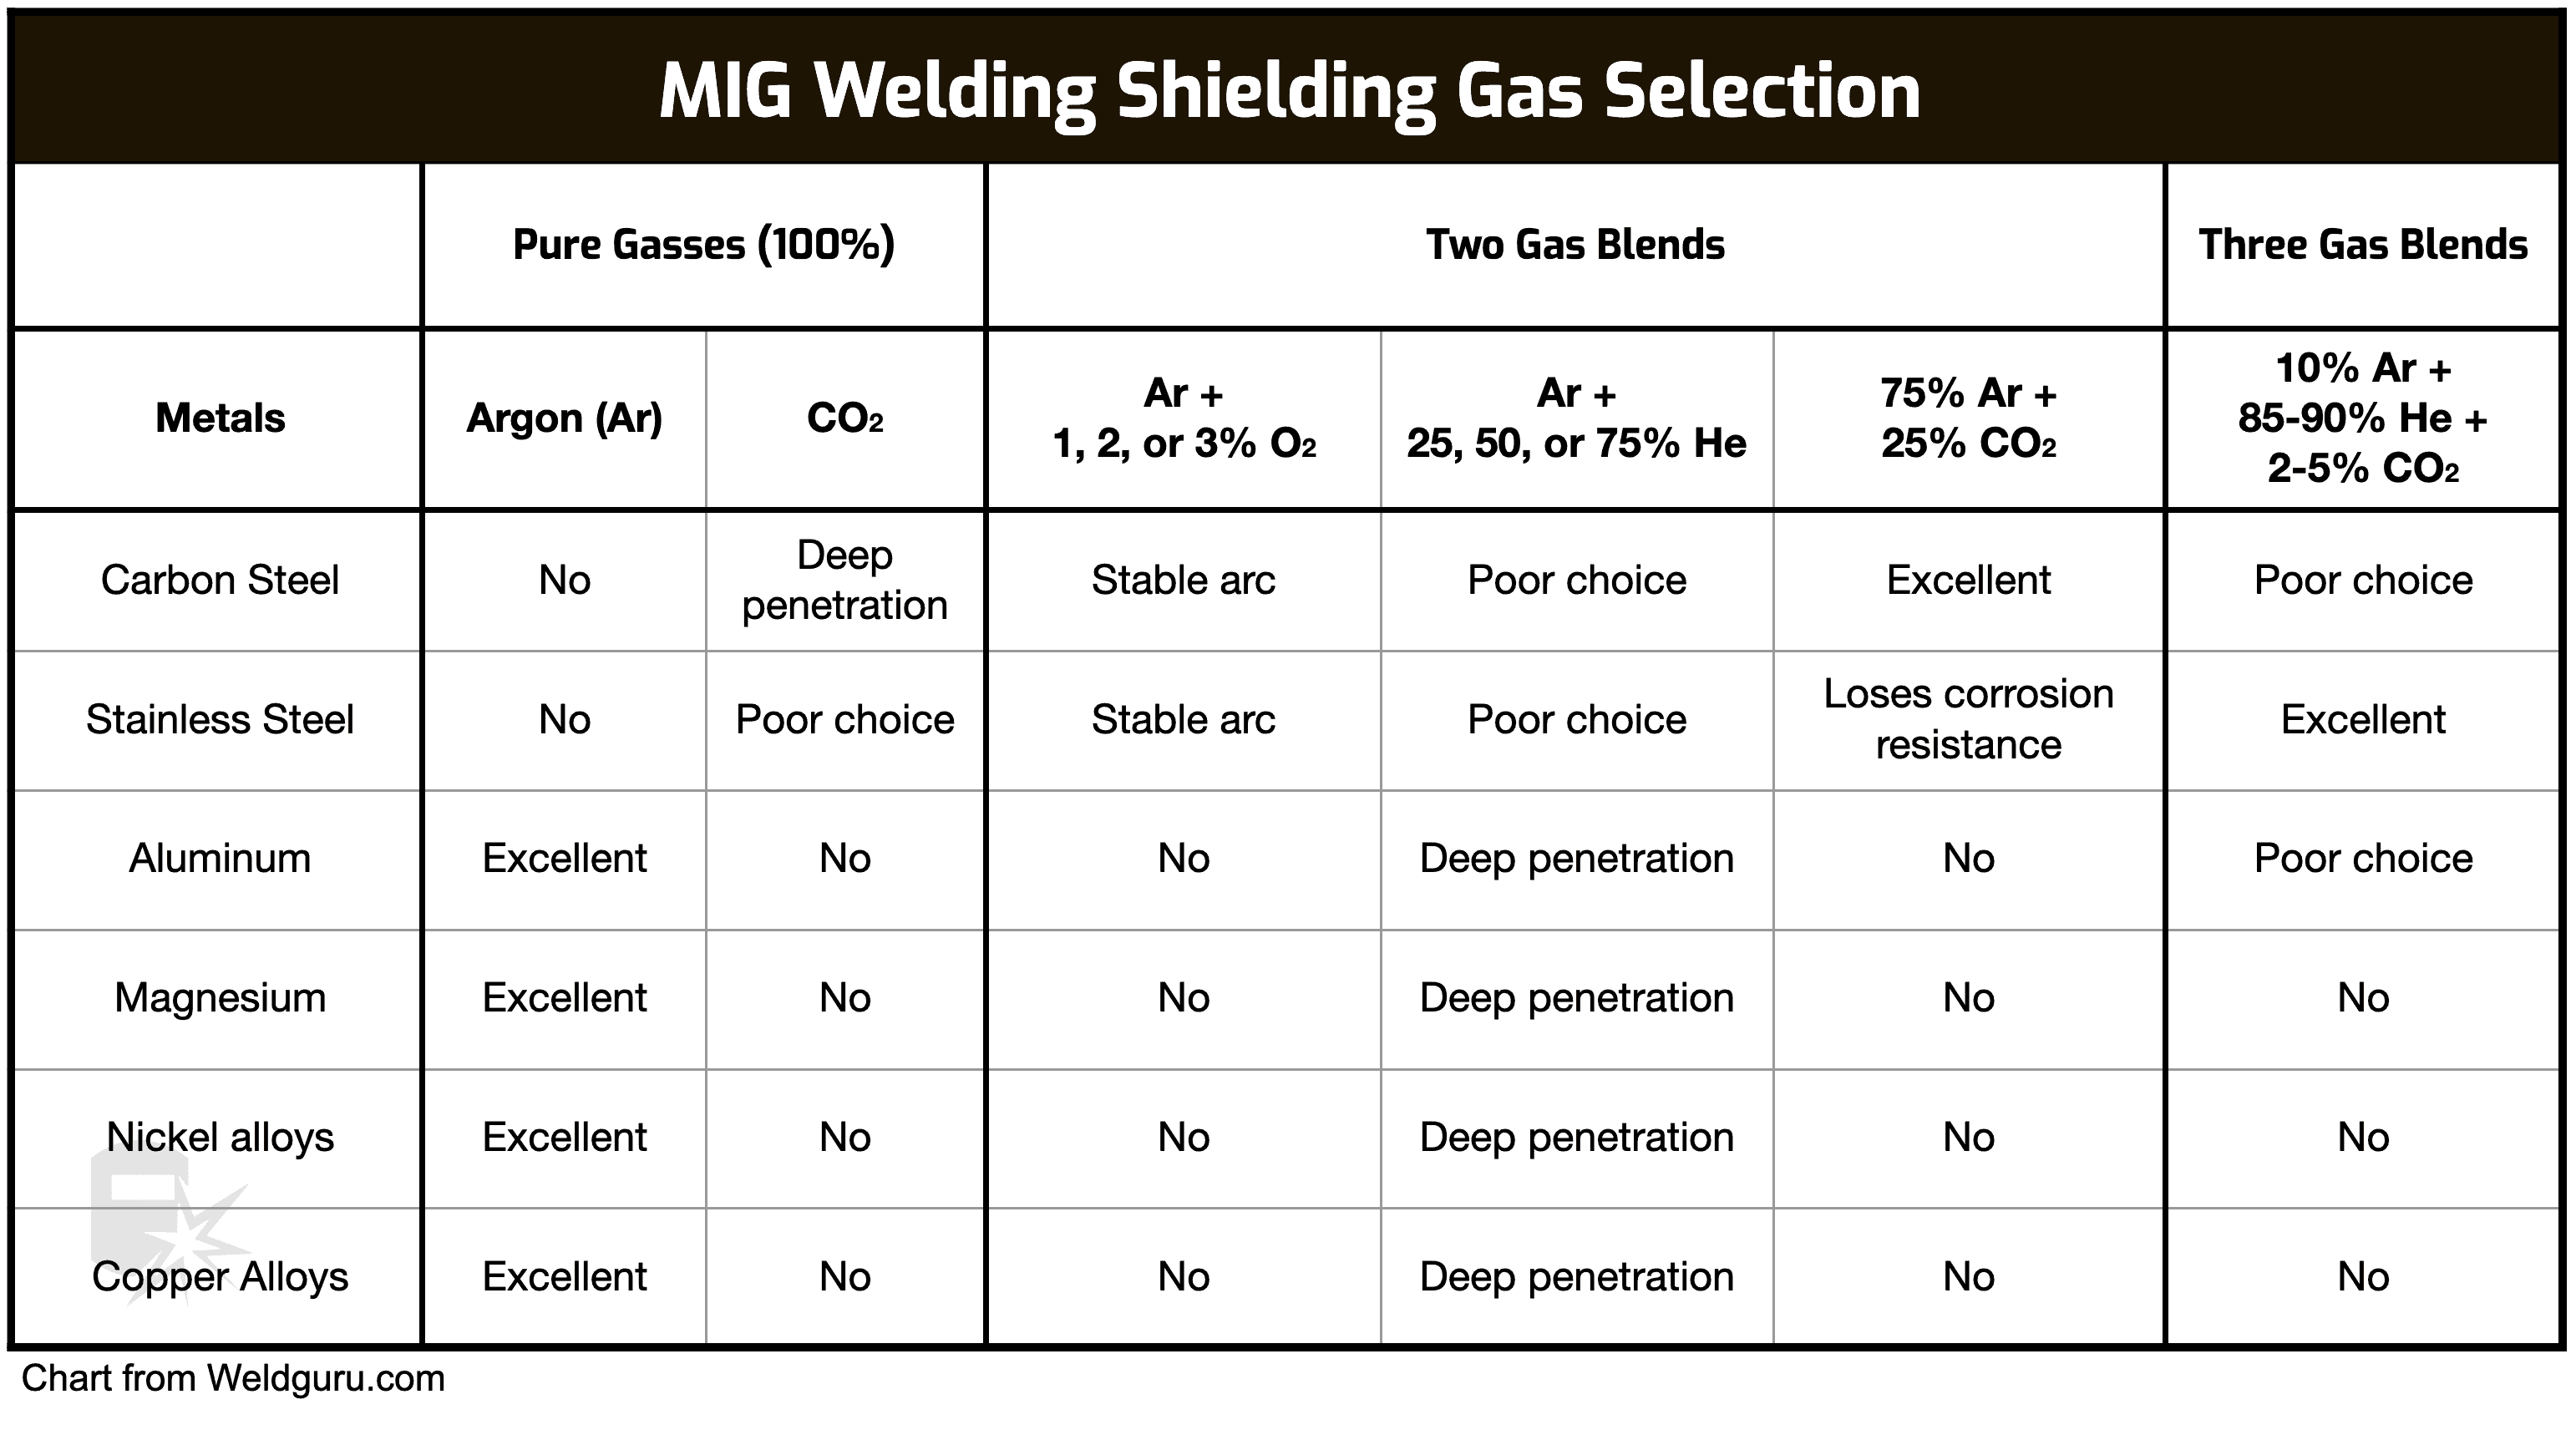 mig shielding gas selection chart